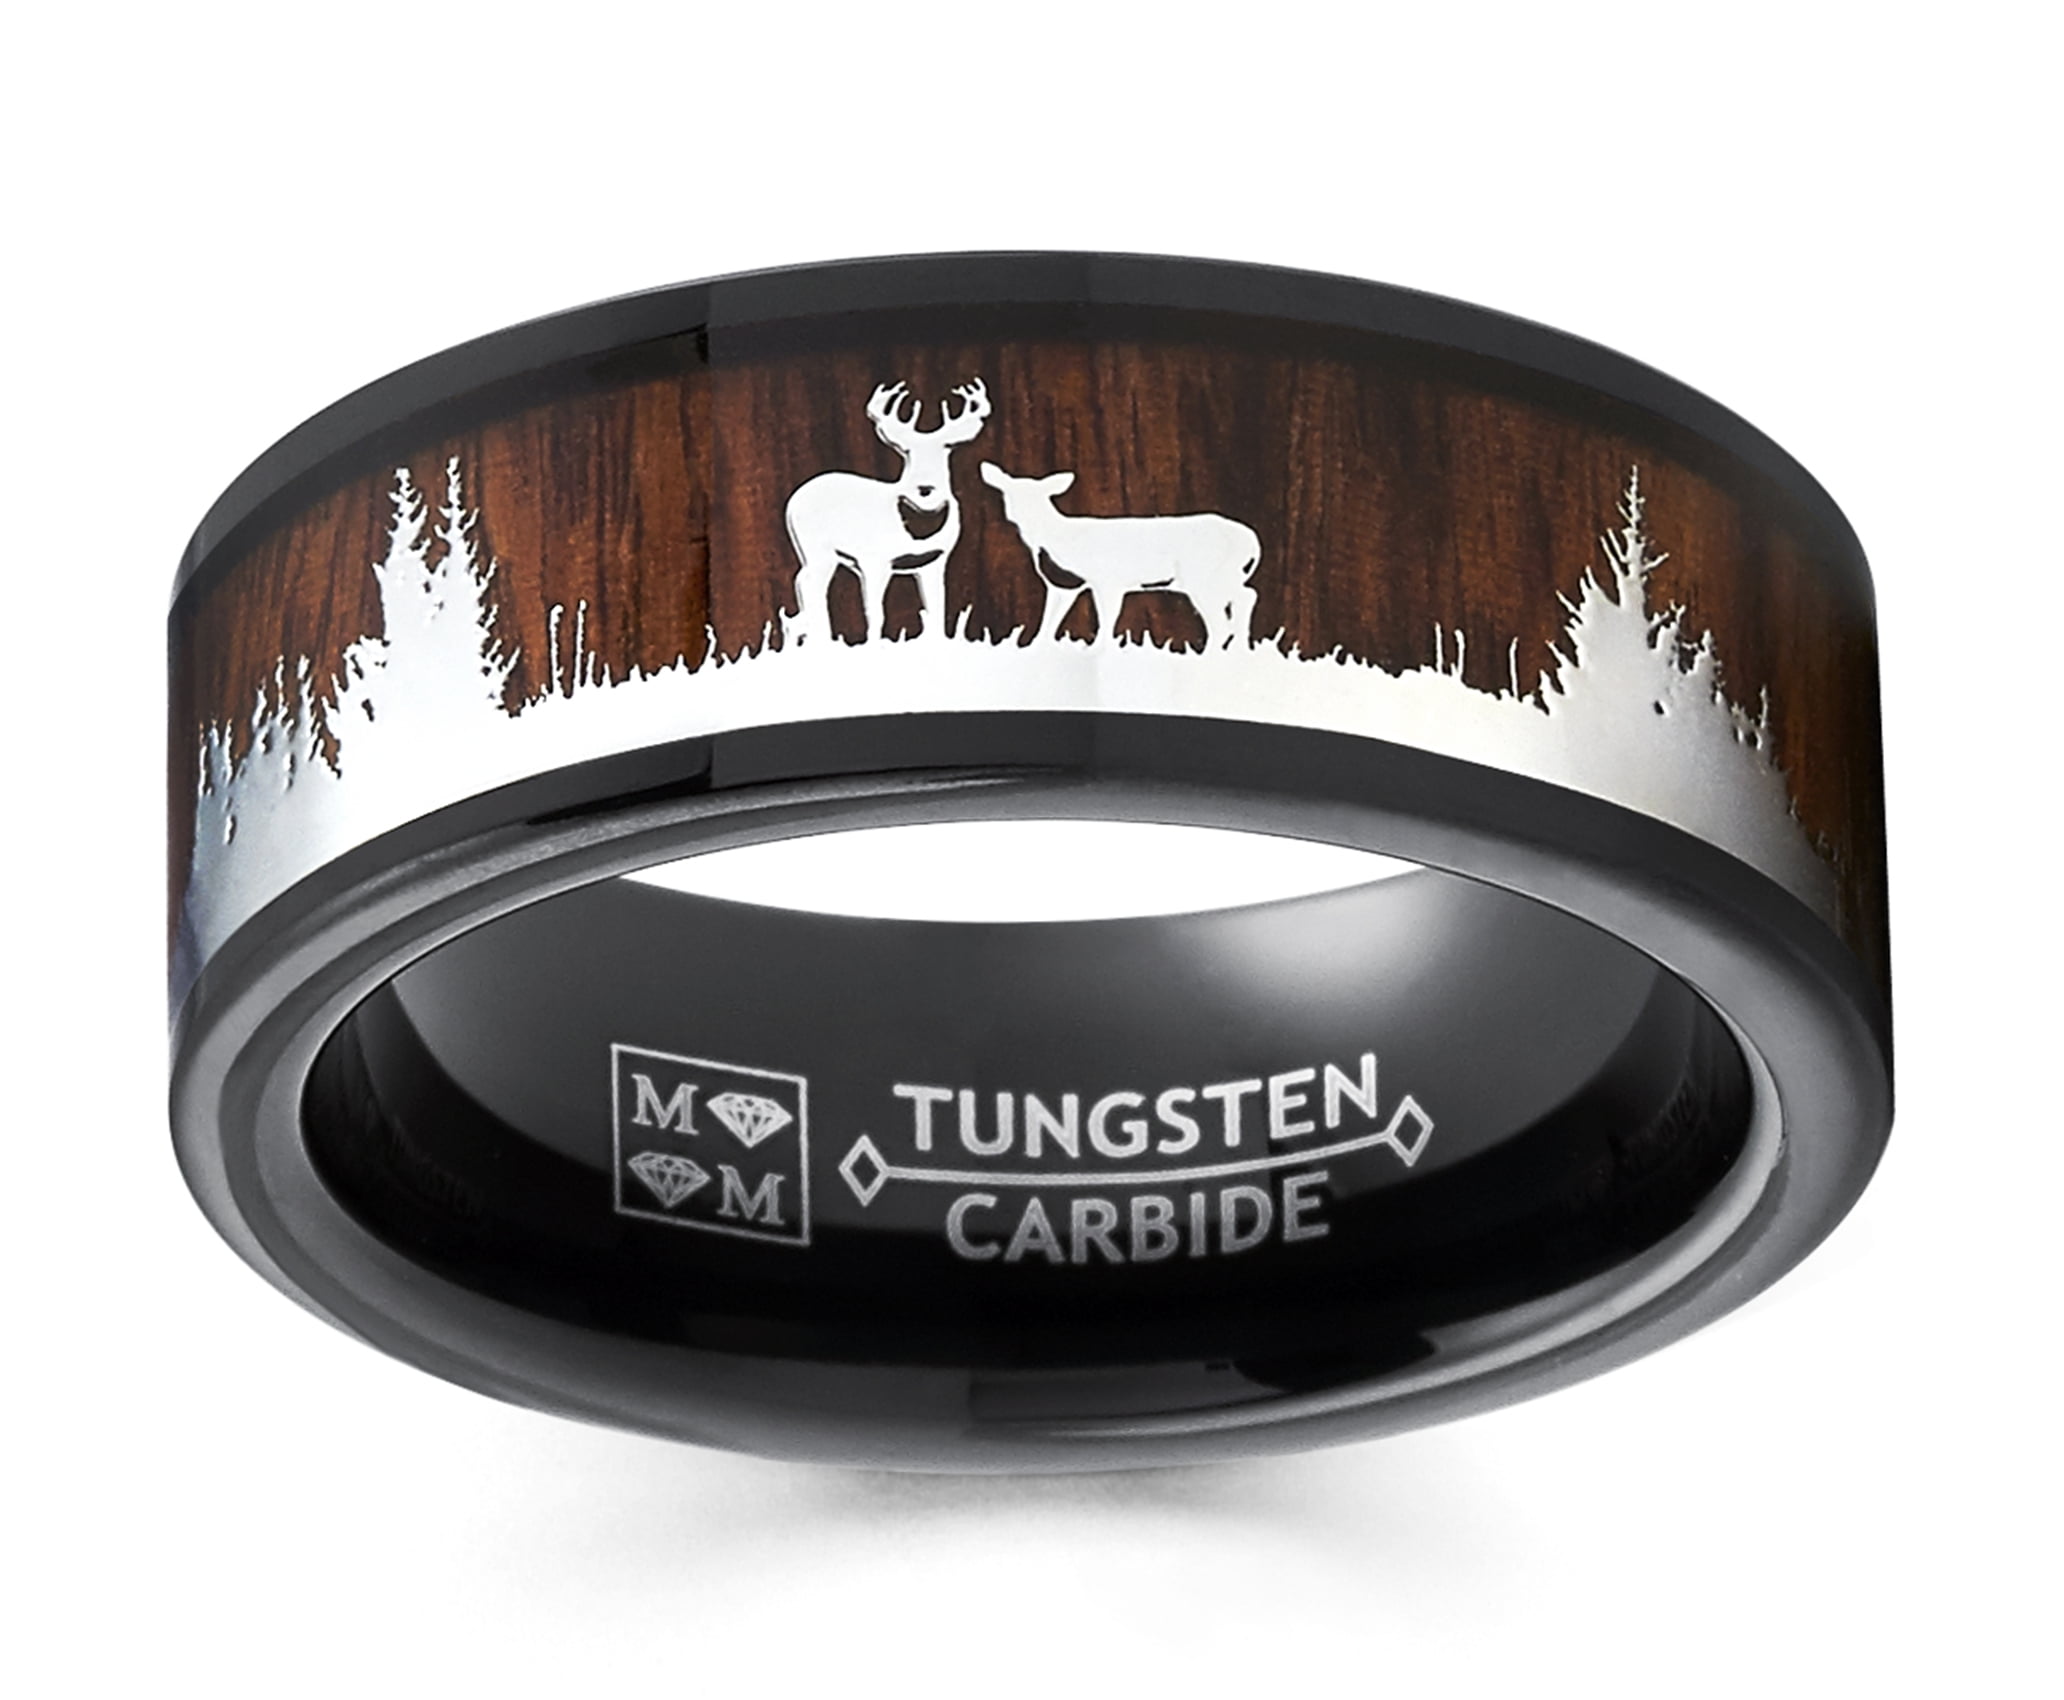 Thorsten Animal Nature Landscape Reindeer Deer Stag Mountain Range Ring Black Tungsten Ring 8mm Wide Wedding Band from Roy Rose Jewelry 